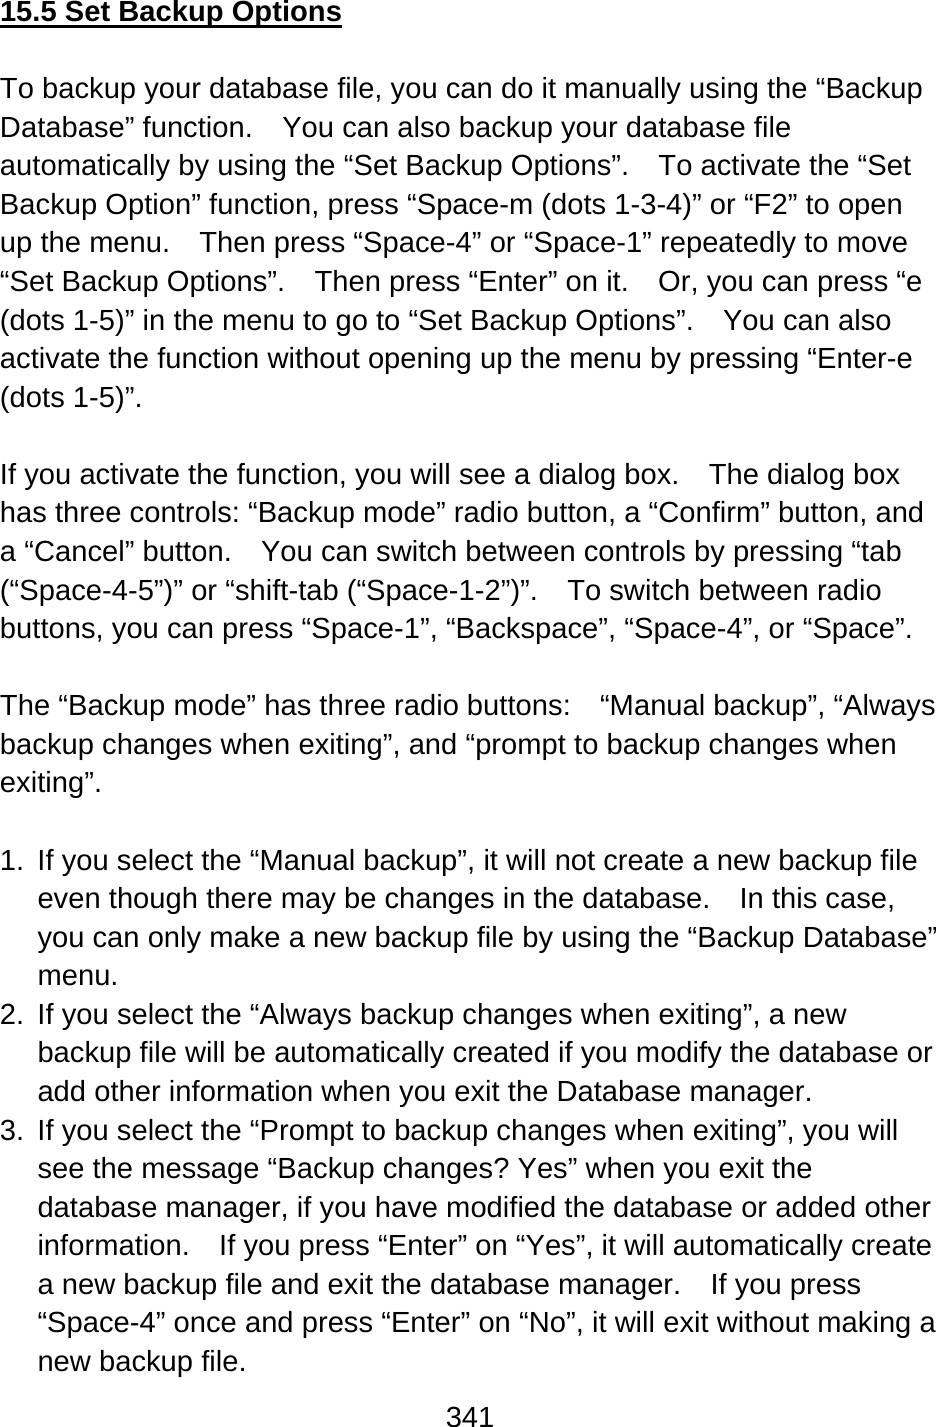 341  15.5 Set Backup Options  To backup your database file, you can do it manually using the “Backup Database” function.  You can also backup your database file automatically by using the “Set Backup Options”.  To activate the “Set Backup Option” function, press “Space-m (dots 1-3-4)” or “F2” to open up the menu.    Then press “Space-4” or “Space-1” repeatedly to move “Set Backup Options”.    Then press “Enter” on it.    Or, you can press “e (dots 1-5)” in the menu to go to “Set Backup Options”.    You can also activate the function without opening up the menu by pressing “Enter-e (dots 1-5)”.  If you activate the function, you will see a dialog box.    The dialog box has three controls: “Backup mode” radio button, a “Confirm” button, and a “Cancel” button.    You can switch between controls by pressing “tab (“Space-4-5”)” or “shift-tab (“Space-1-2”)”.  To switch between radio buttons, you can press “Space-1”, “Backspace”, “Space-4”, or “Space”.  The “Backup mode” has three radio buttons:    “Manual backup”, “Always backup changes when exiting”, and “prompt to backup changes when exiting”.  1.  If you select the “Manual backup”, it will not create a new backup file even though there may be changes in the database.  In this case, you can only make a new backup file by using the “Backup Database” menu. 2.  If you select the “Always backup changes when exiting”, a new backup file will be automatically created if you modify the database or add other information when you exit the Database manager. 3.  If you select the “Prompt to backup changes when exiting”, you will see the message “Backup changes? Yes” when you exit the database manager, if you have modified the database or added other information.    If you press “Enter” on “Yes”, it will automatically create a new backup file and exit the database manager.  If you press “Space-4” once and press “Enter” on “No”, it will exit without making a new backup file. 